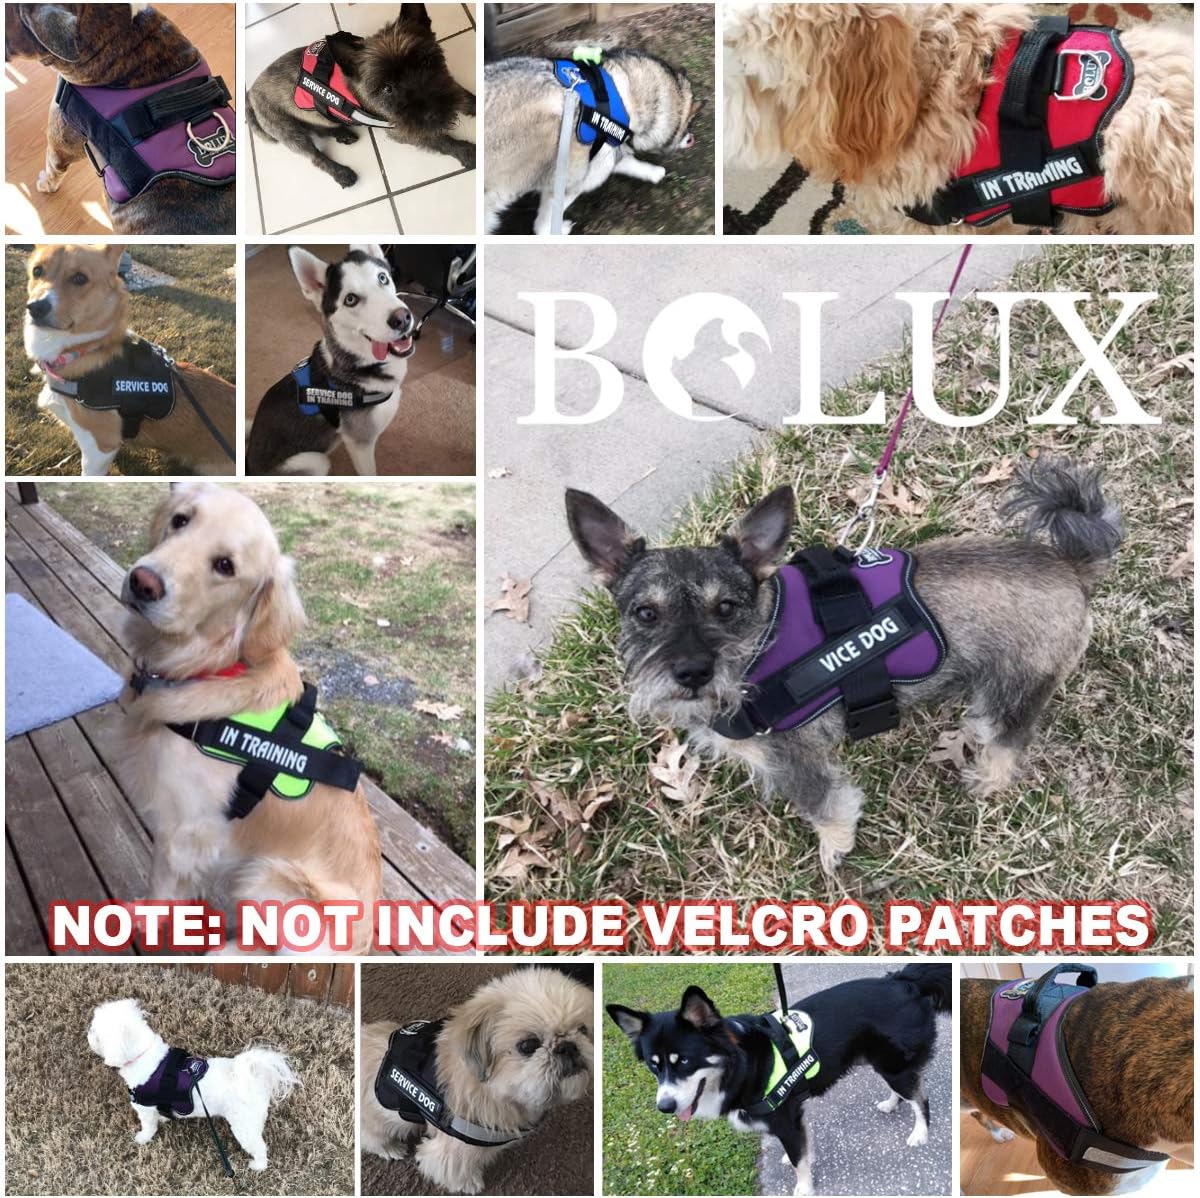 Bolux Dog Harness, No-Pull Reflective Dog Vest, Breathable Adjustable Pet Harness with Handle for Outdoor Walking - No More Pulling, Tugging or Choking (Turquoise, L)